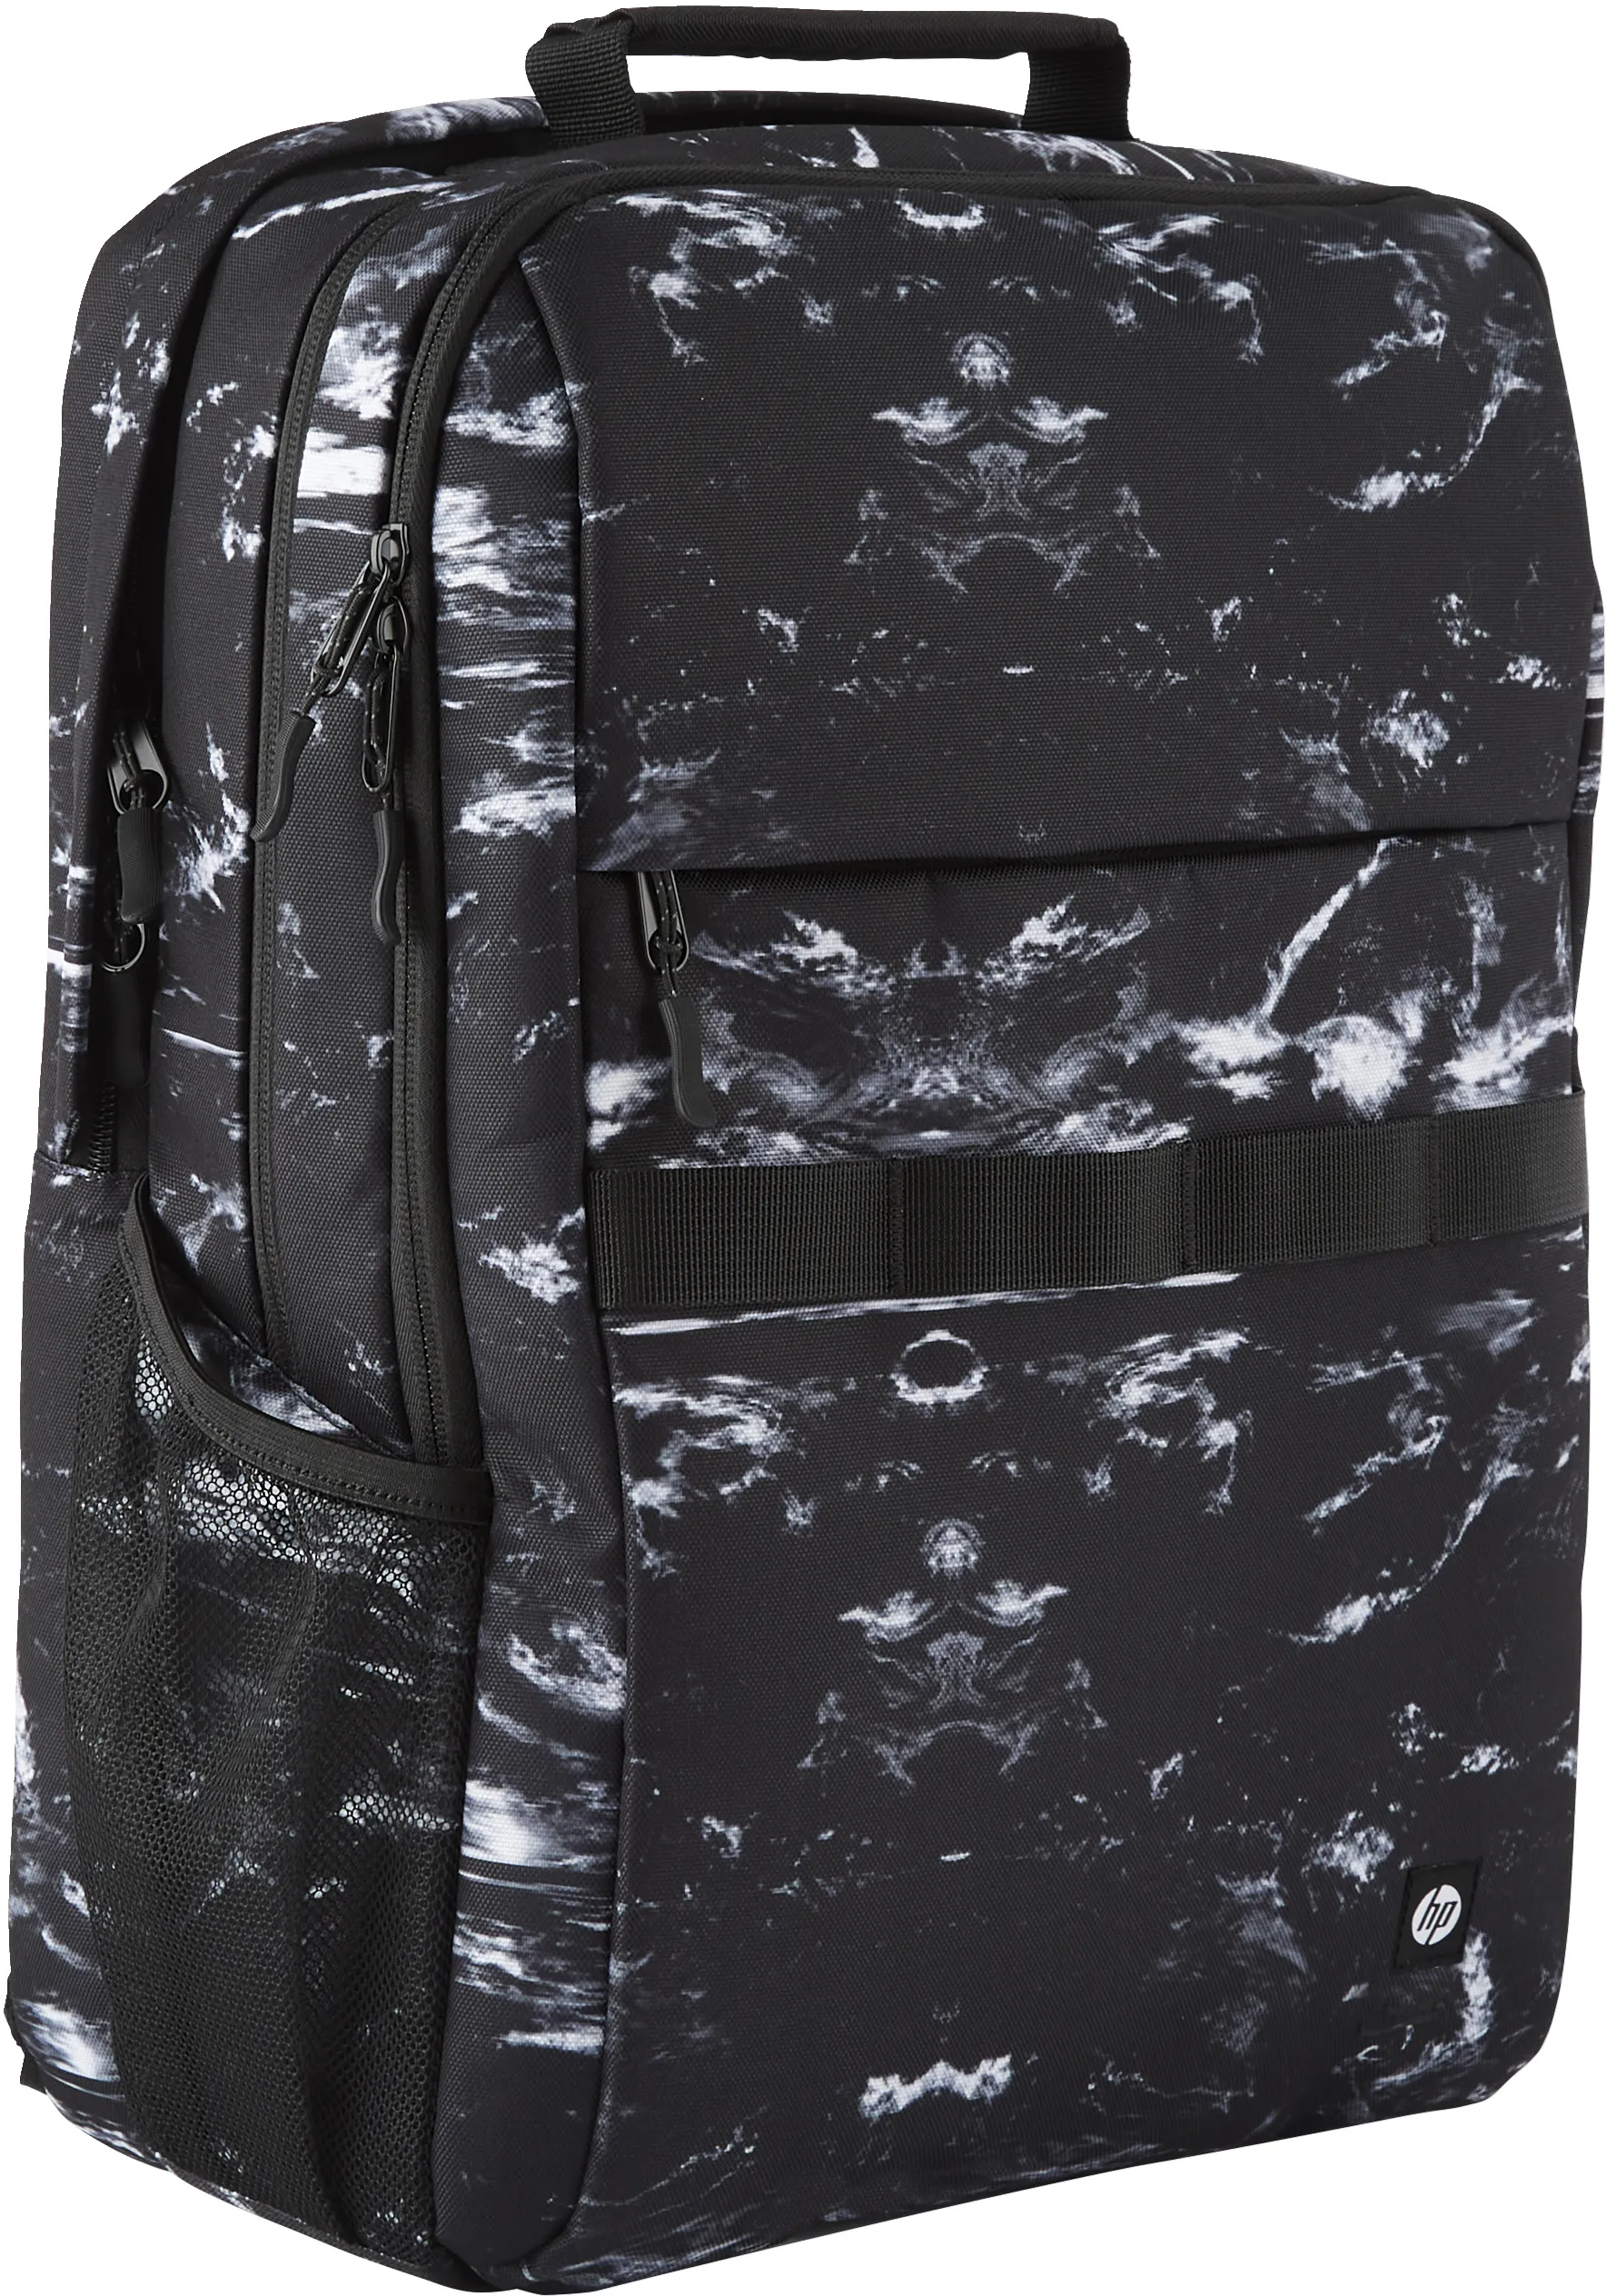 Achat HP Campus XL Marble Stone Backpack sur hello RSE - visuel 3